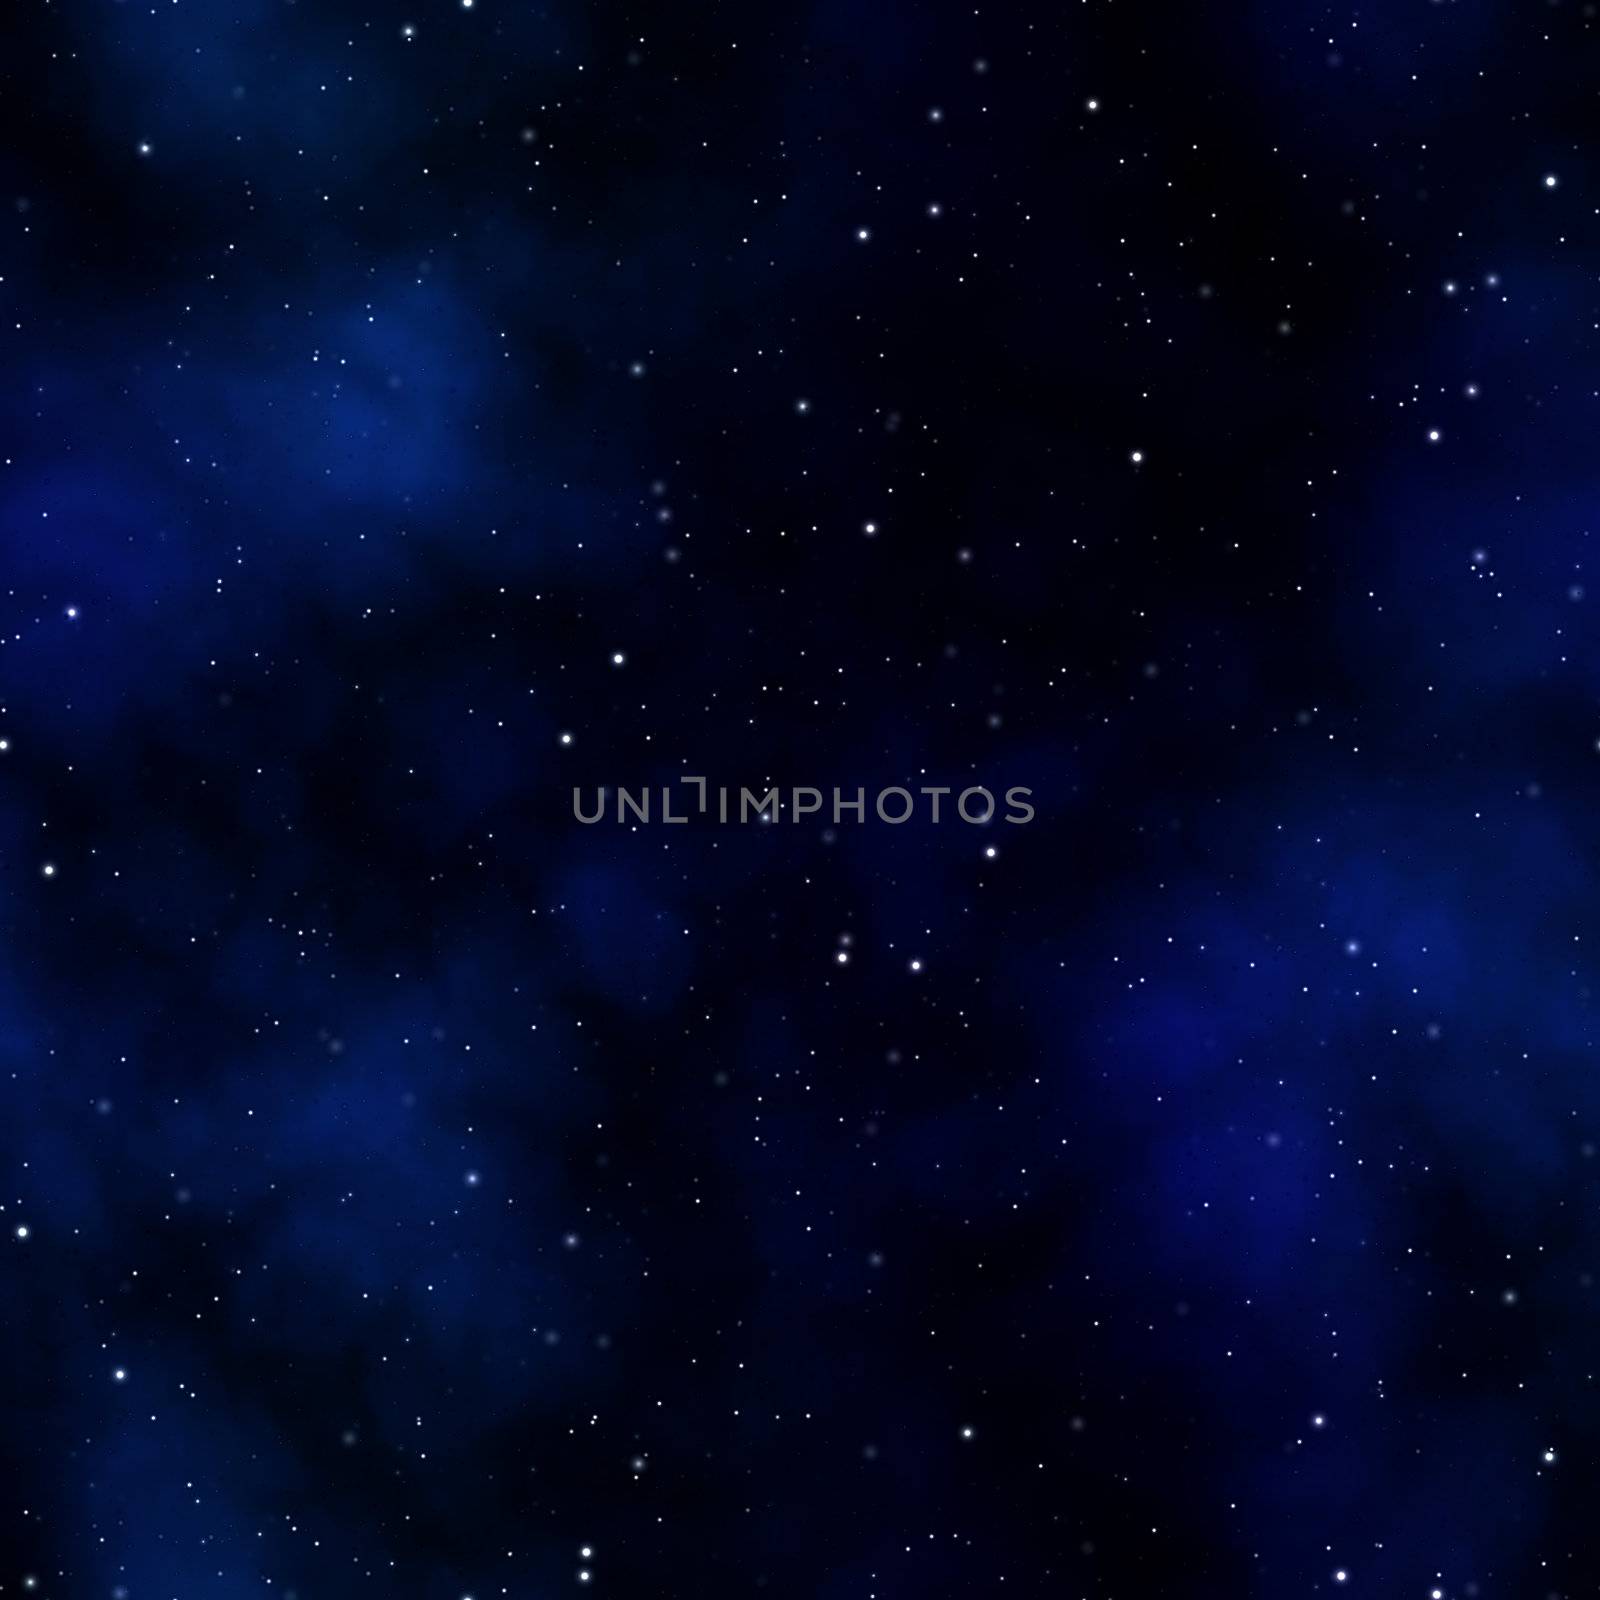 A starry nebula scene in outer space that tiles seamlessly as a pattern in any direction.